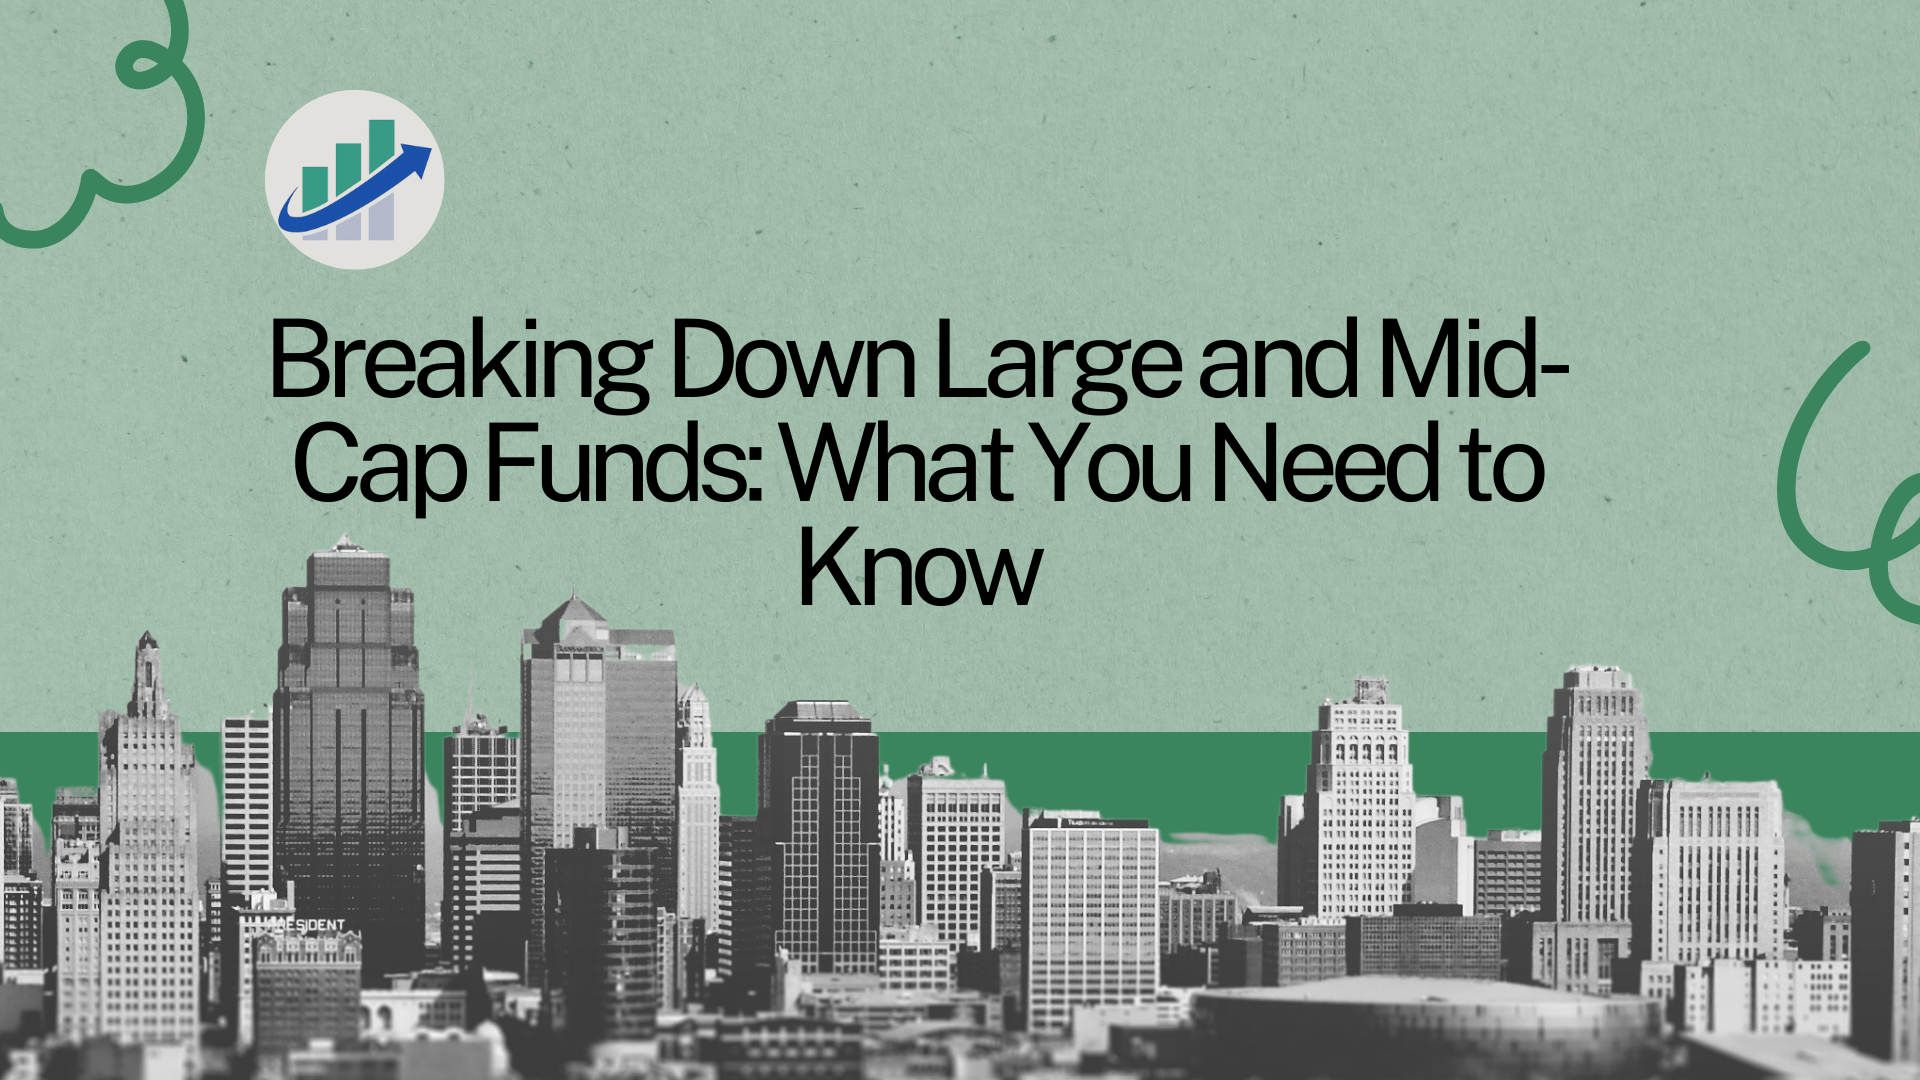 Breaking Down Large and Mid-Cap Funds: What You Need to Know